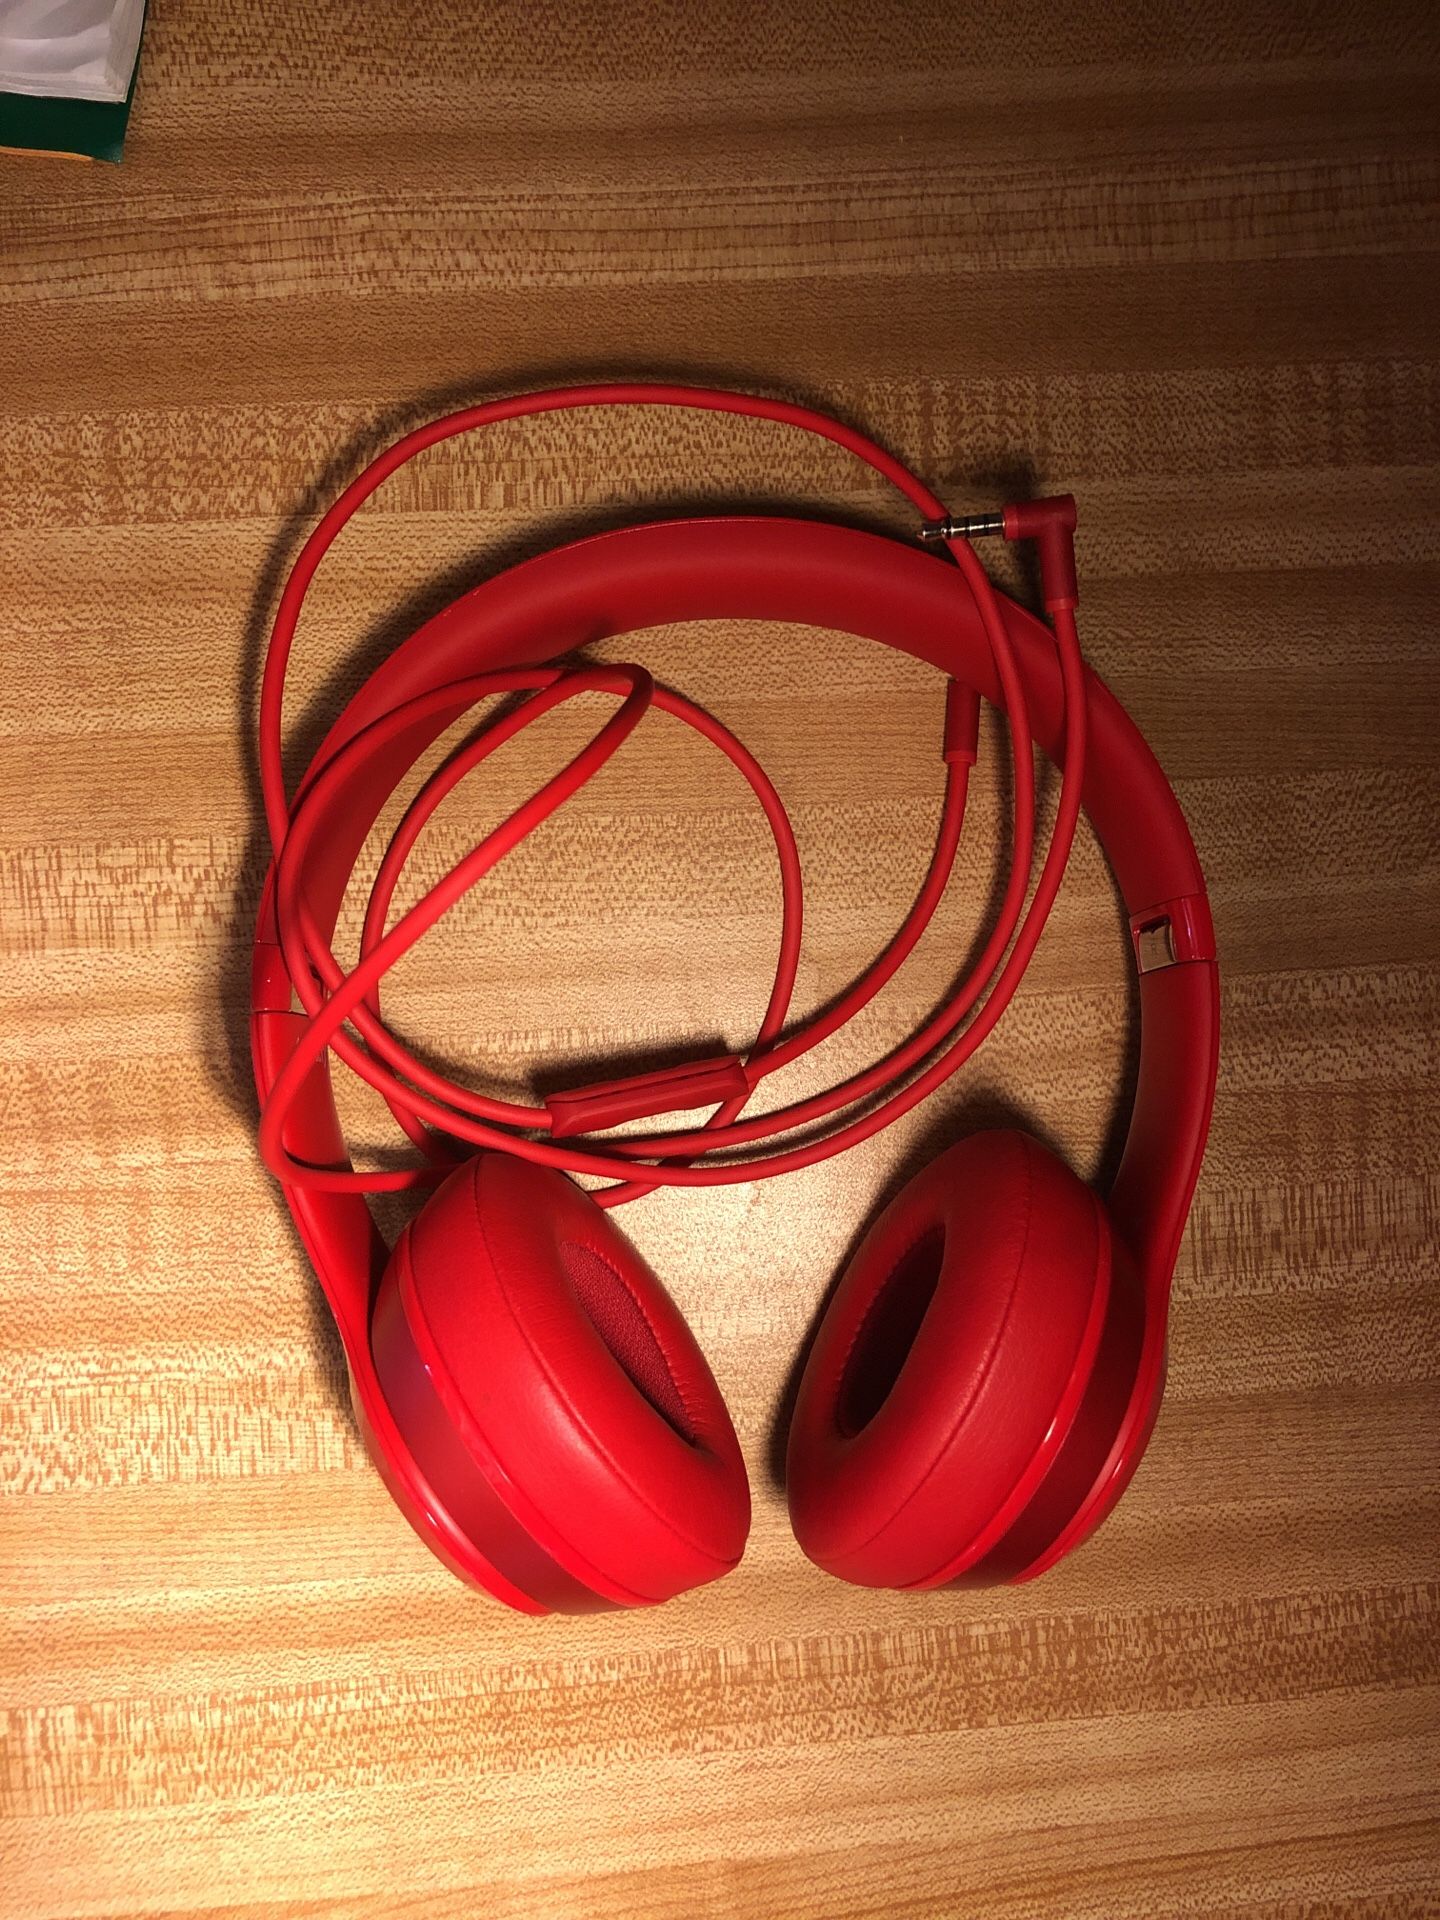 Beats solo 2 red